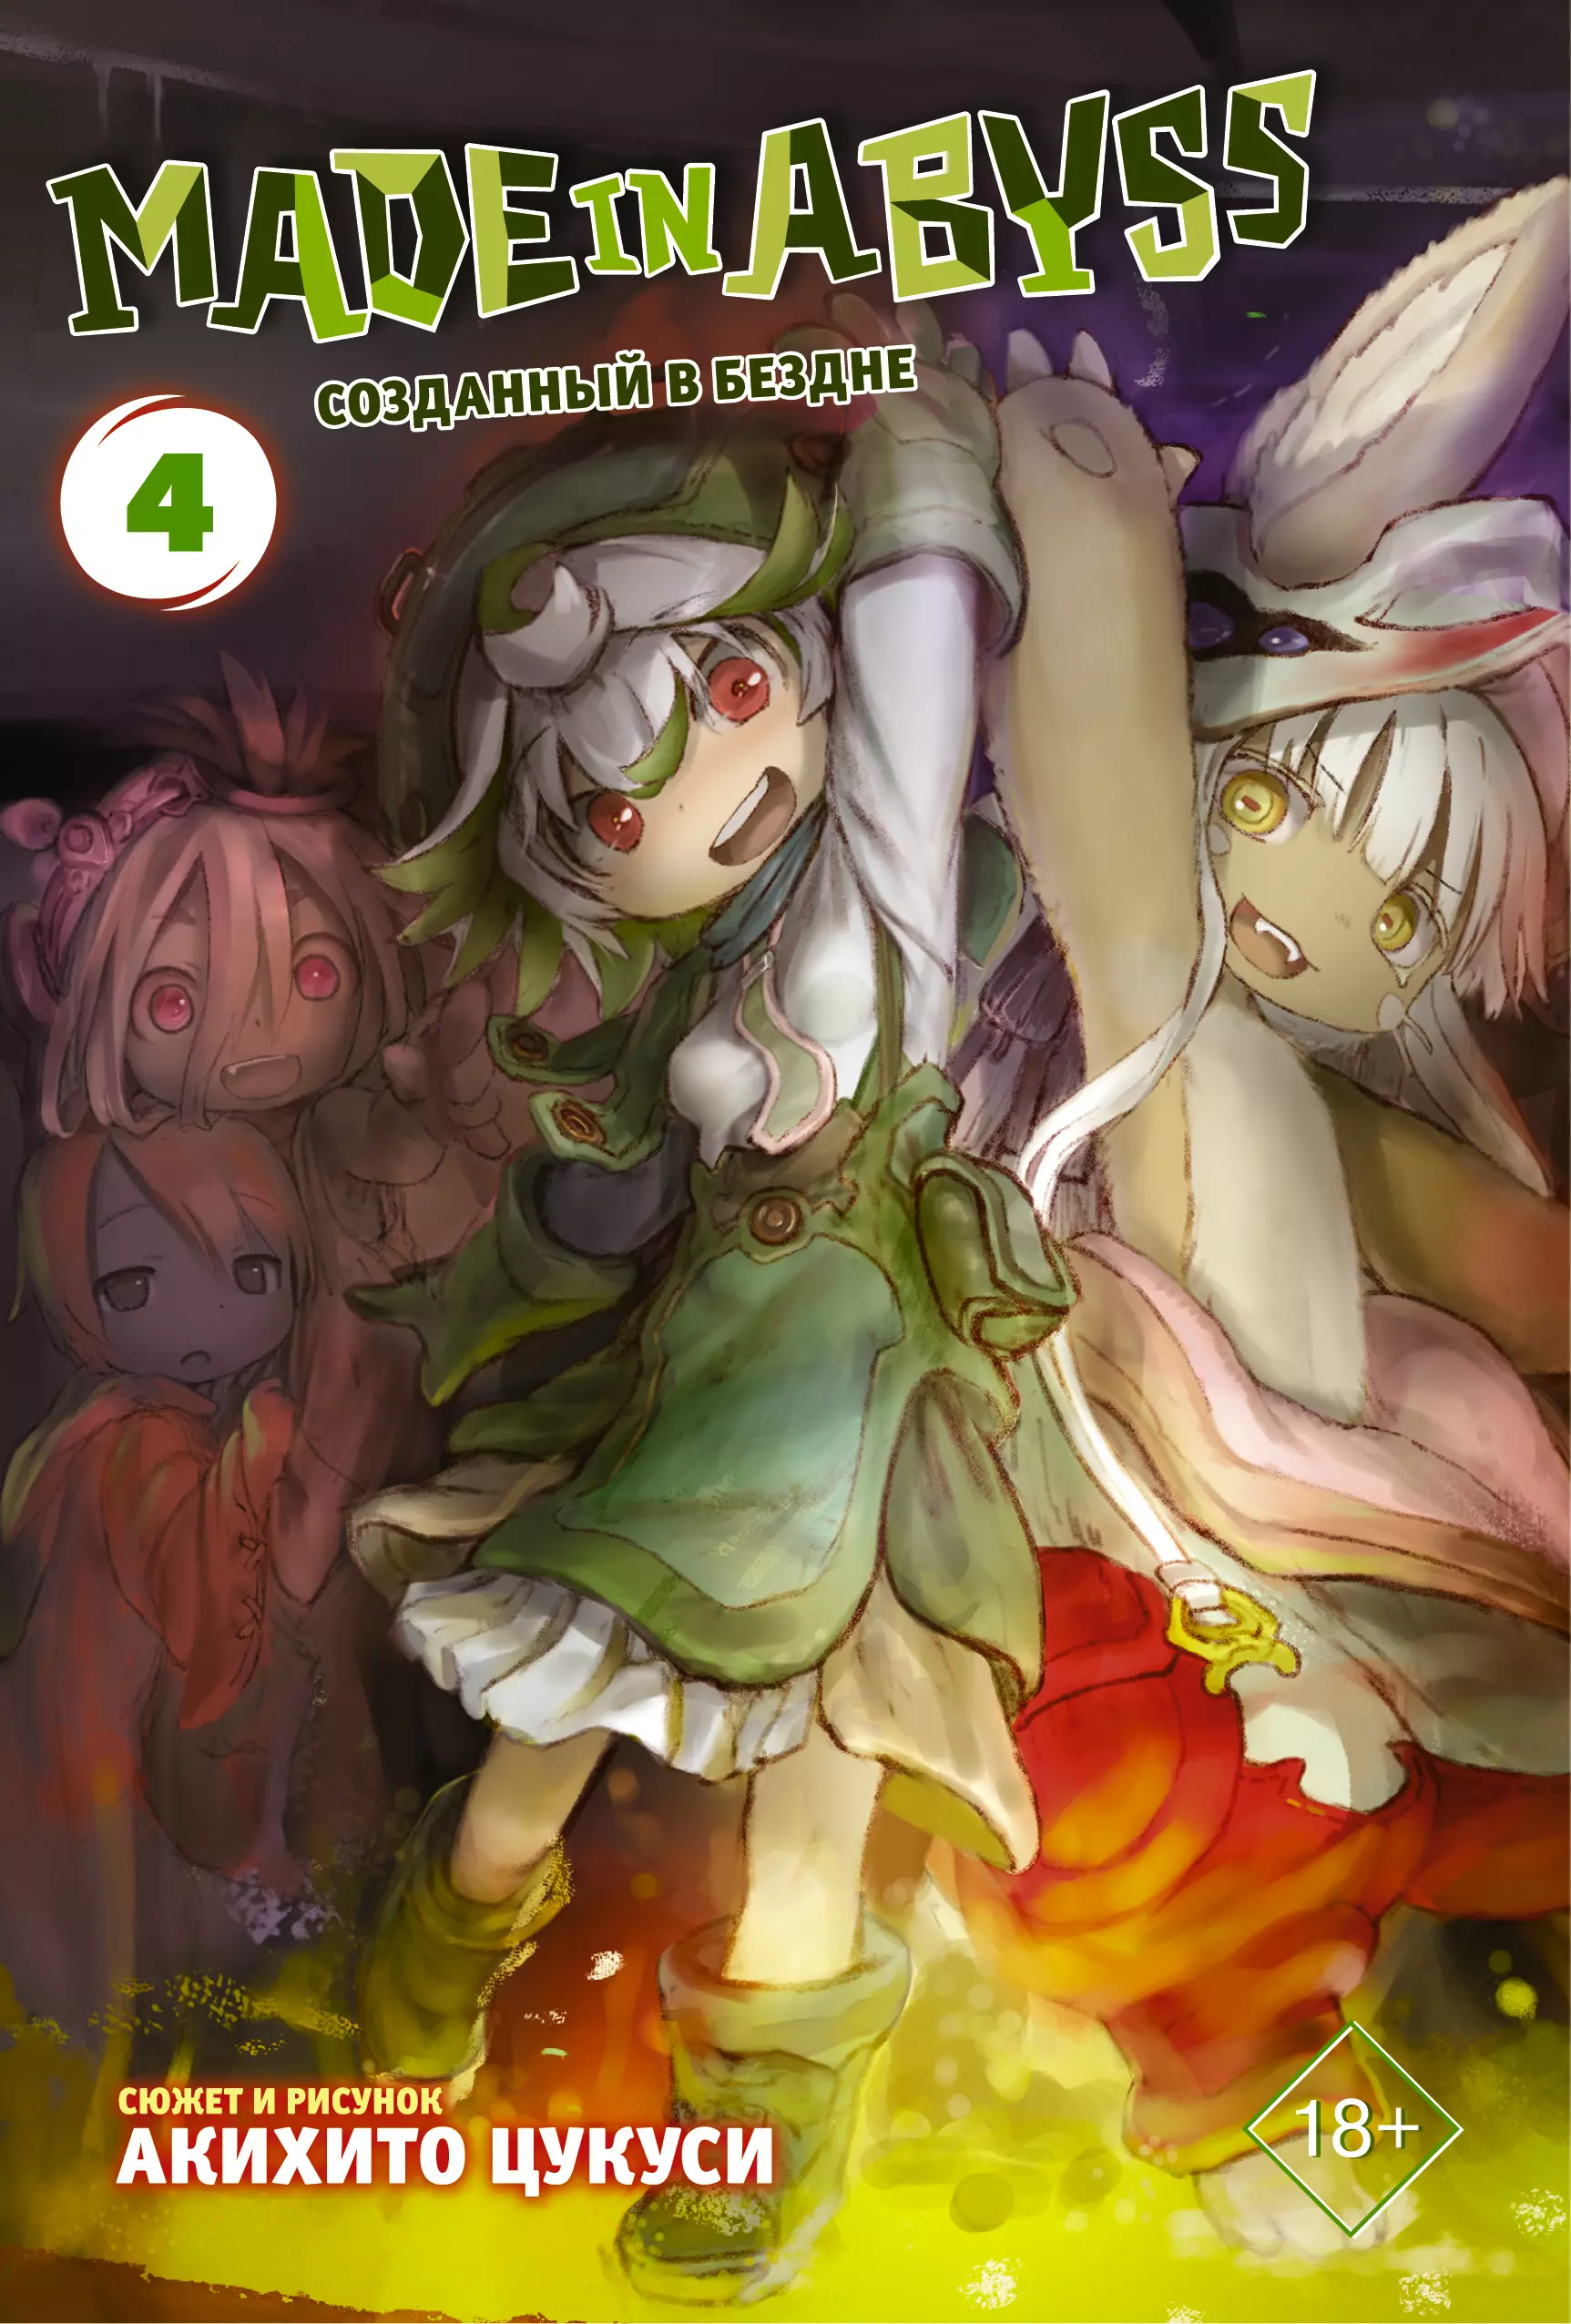 Made in Abyss. Созданный в бездне. Том 4 набор манга made in abyss созданный в бездне том 4 закладка i m an anime person магнитная 6 pack